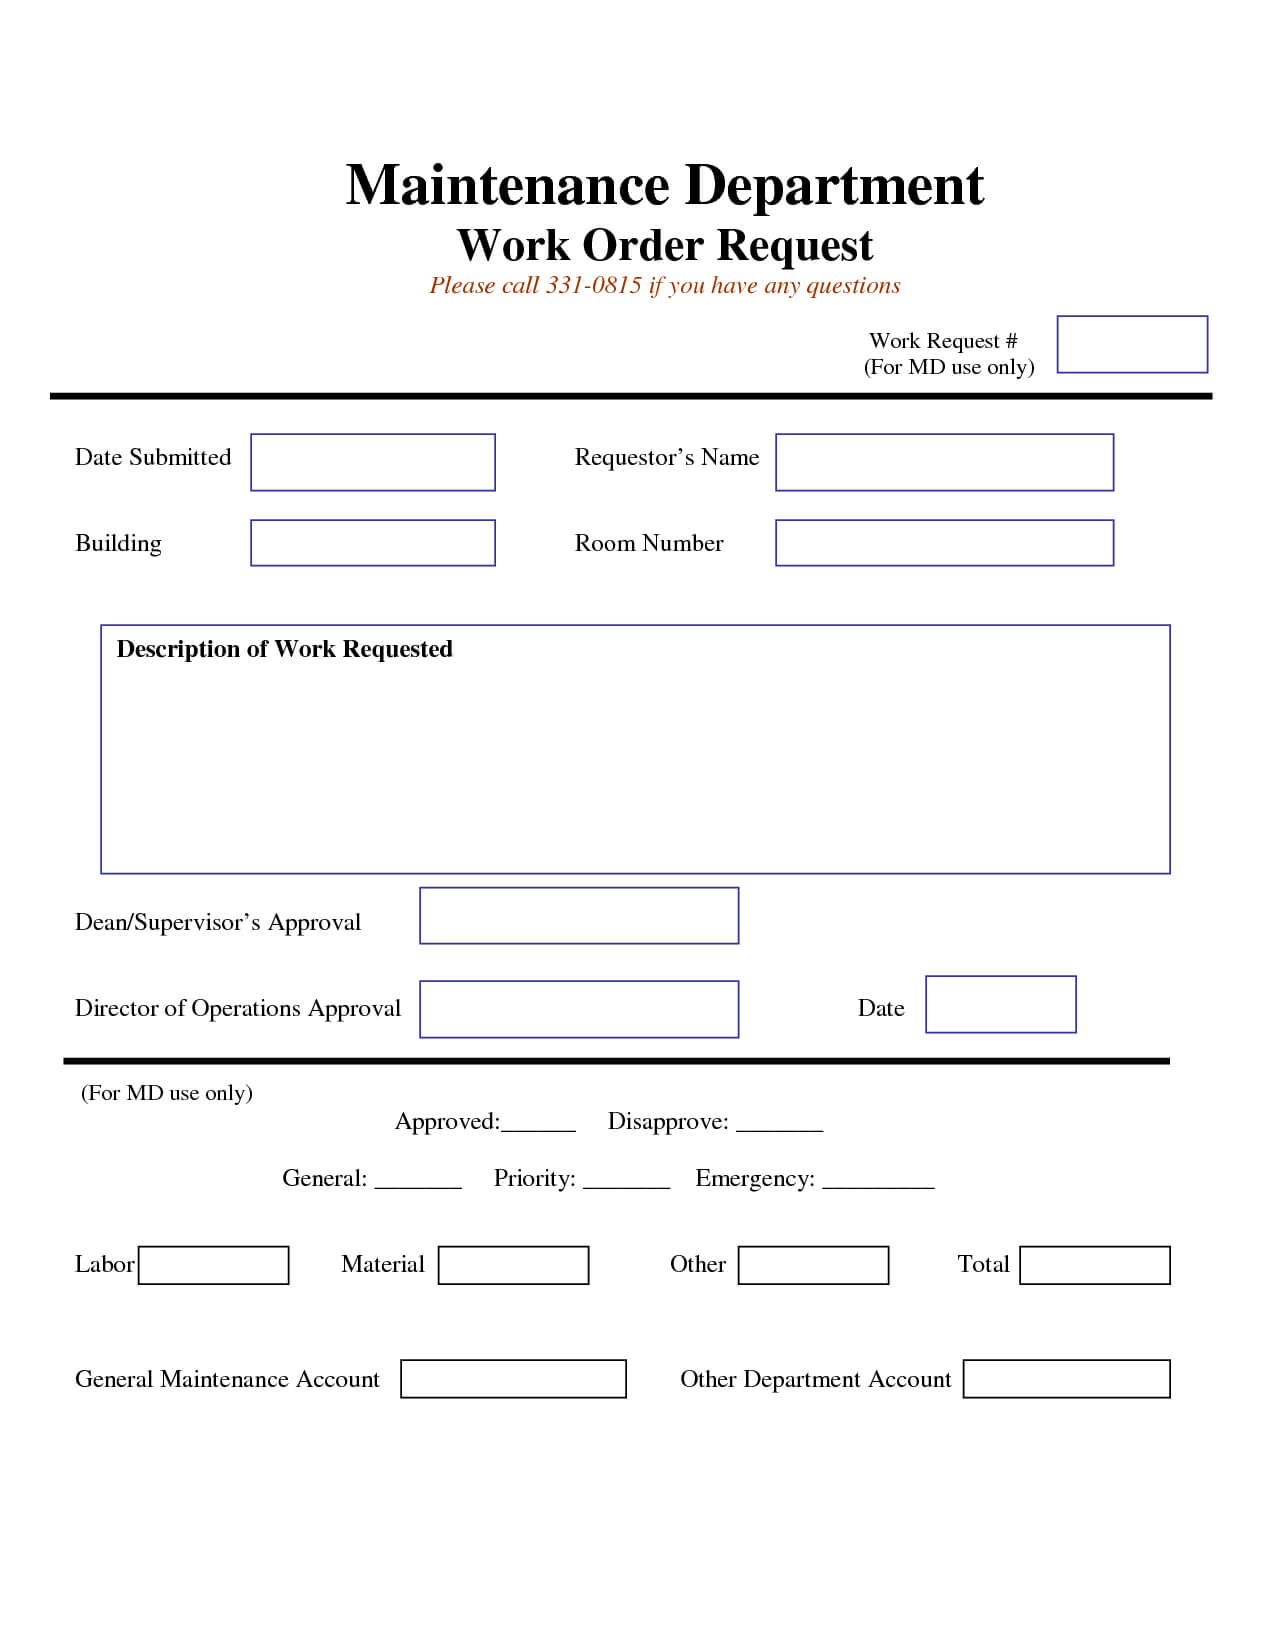 Work Request Form | Maintenance Work Order Request Form Throughout Service Job Card Template